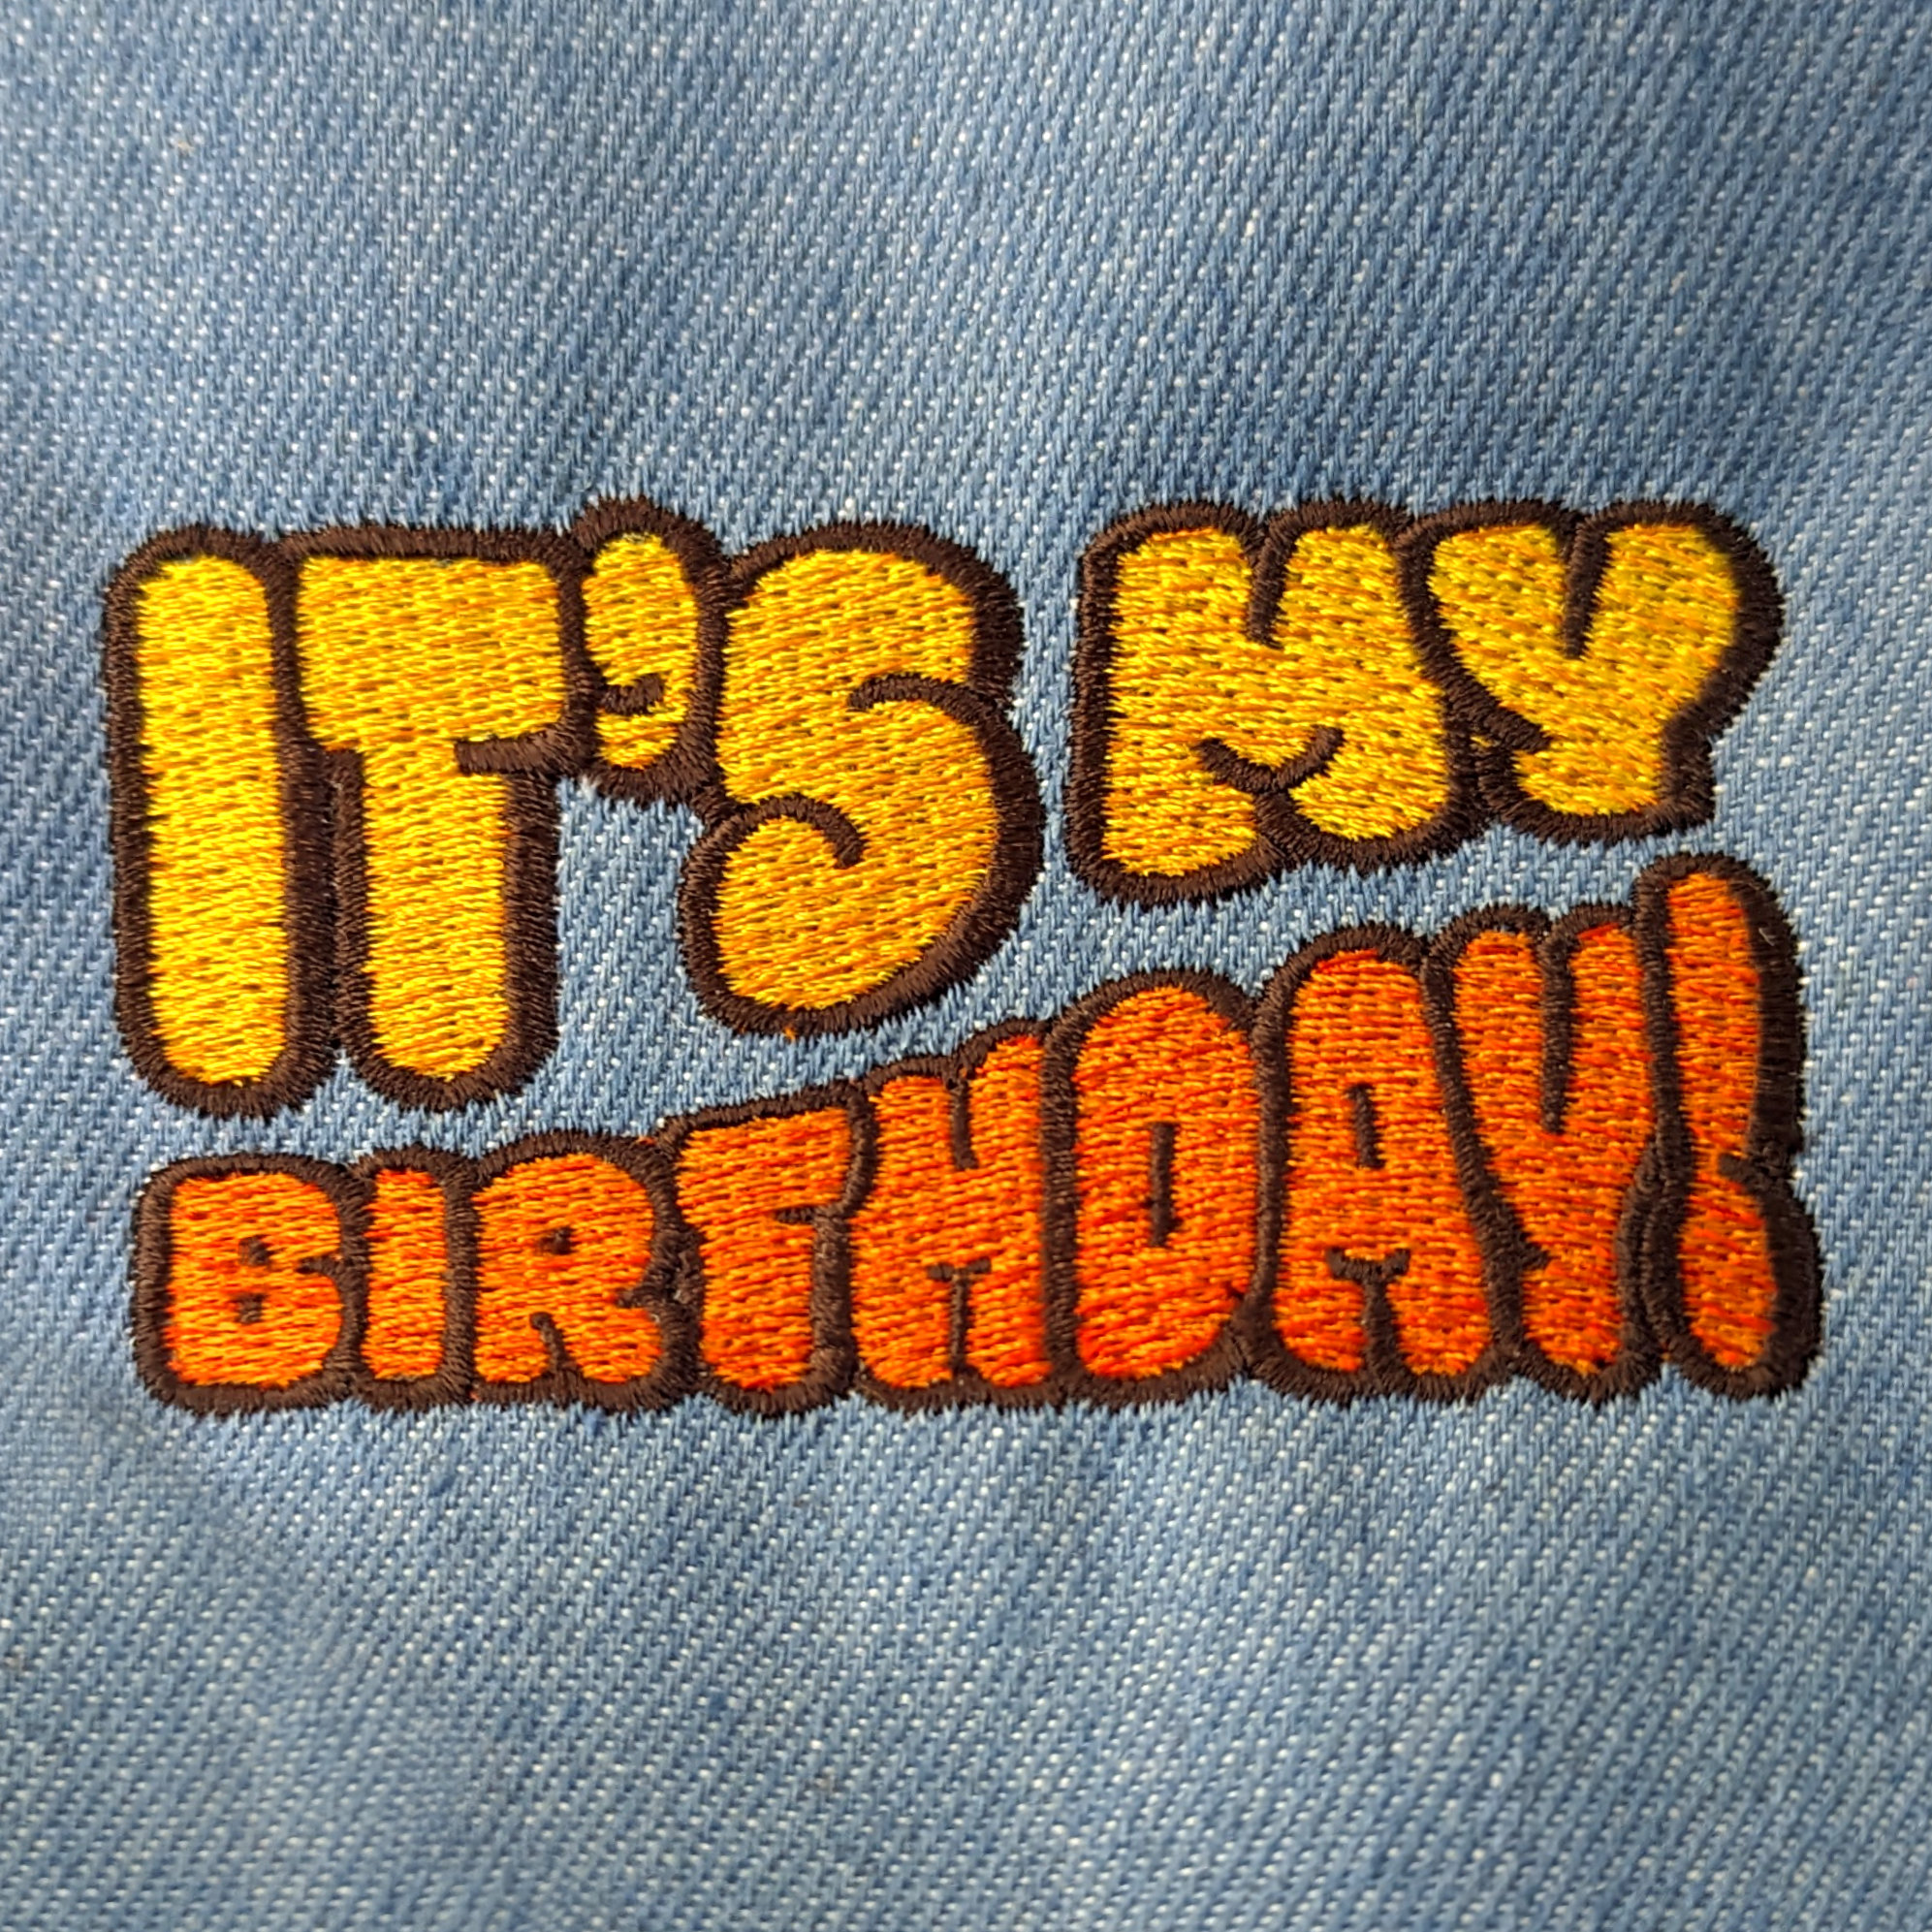 Free “It’s my Birthday!” Embroidery Design